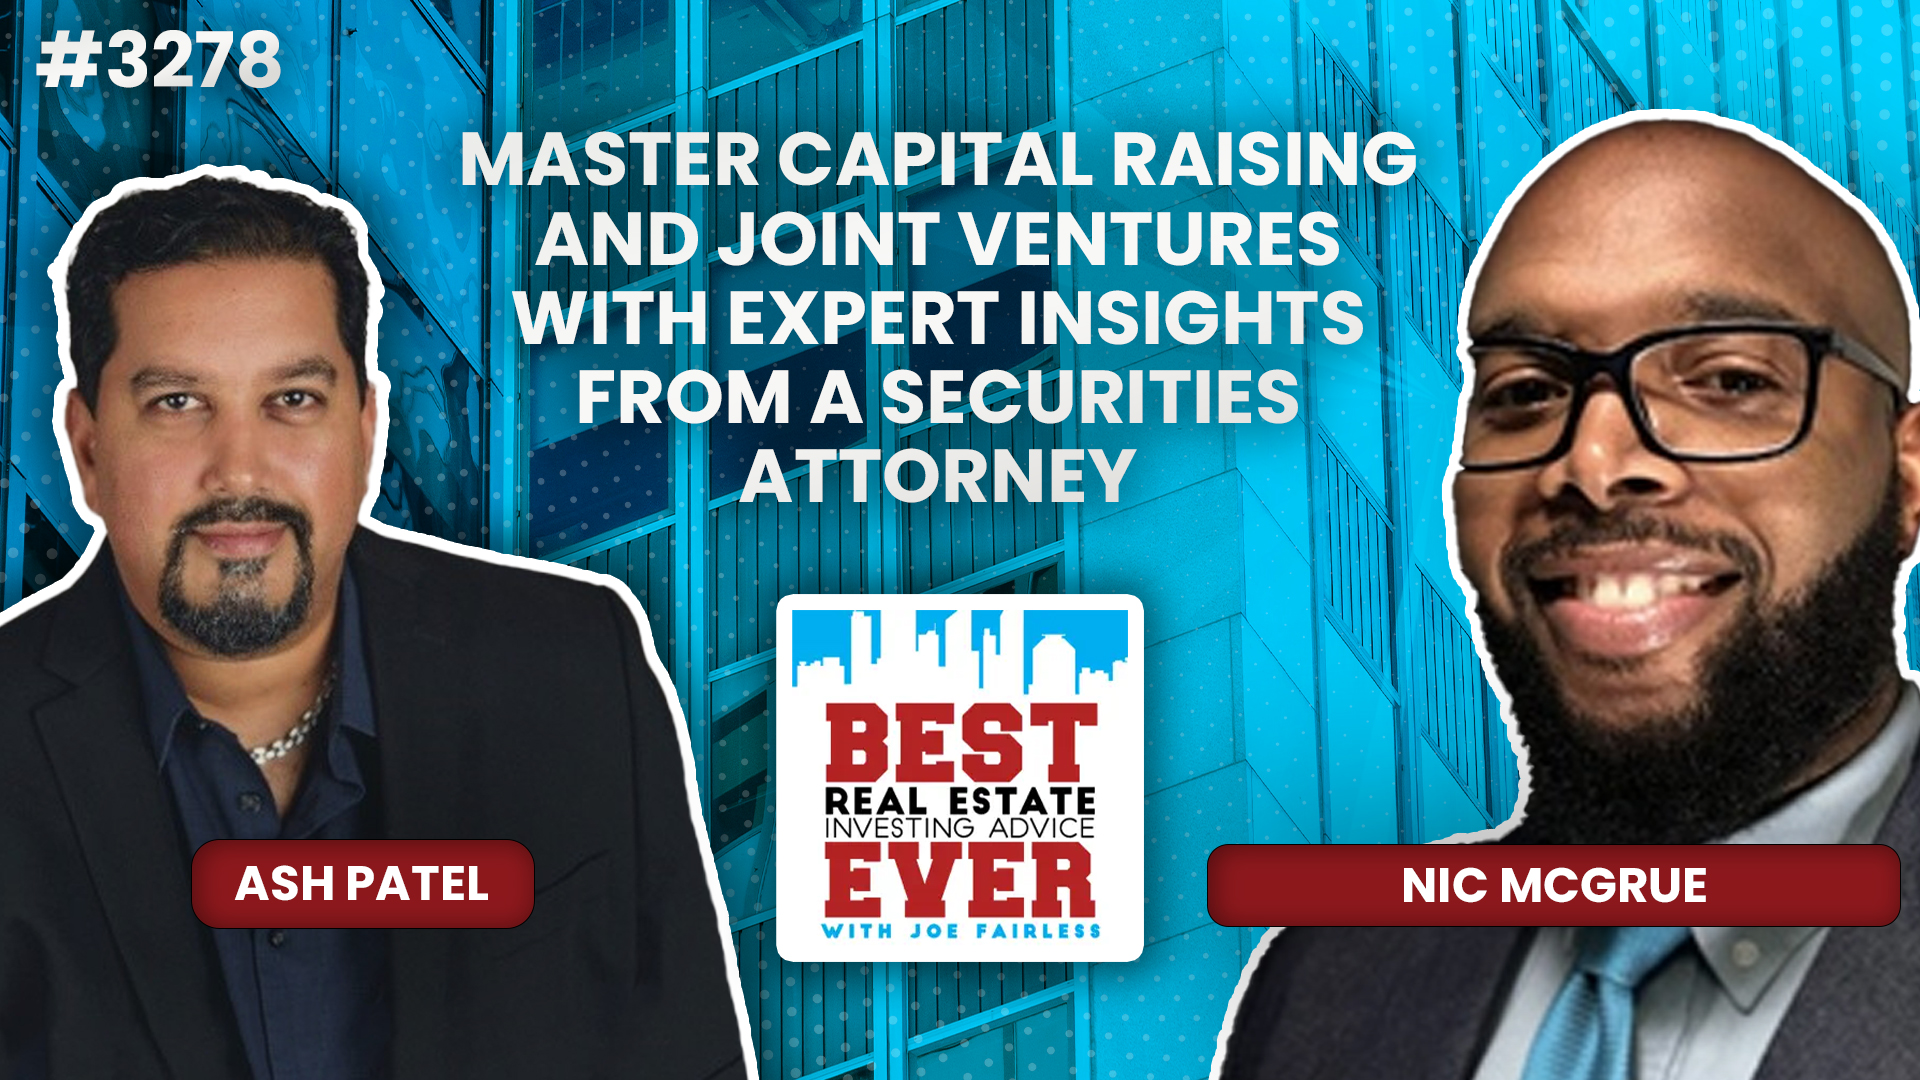 JF3278: Nic McGrue — Master Capital Raising and Joint Ventures With Expert Insights From a Securities Attorney